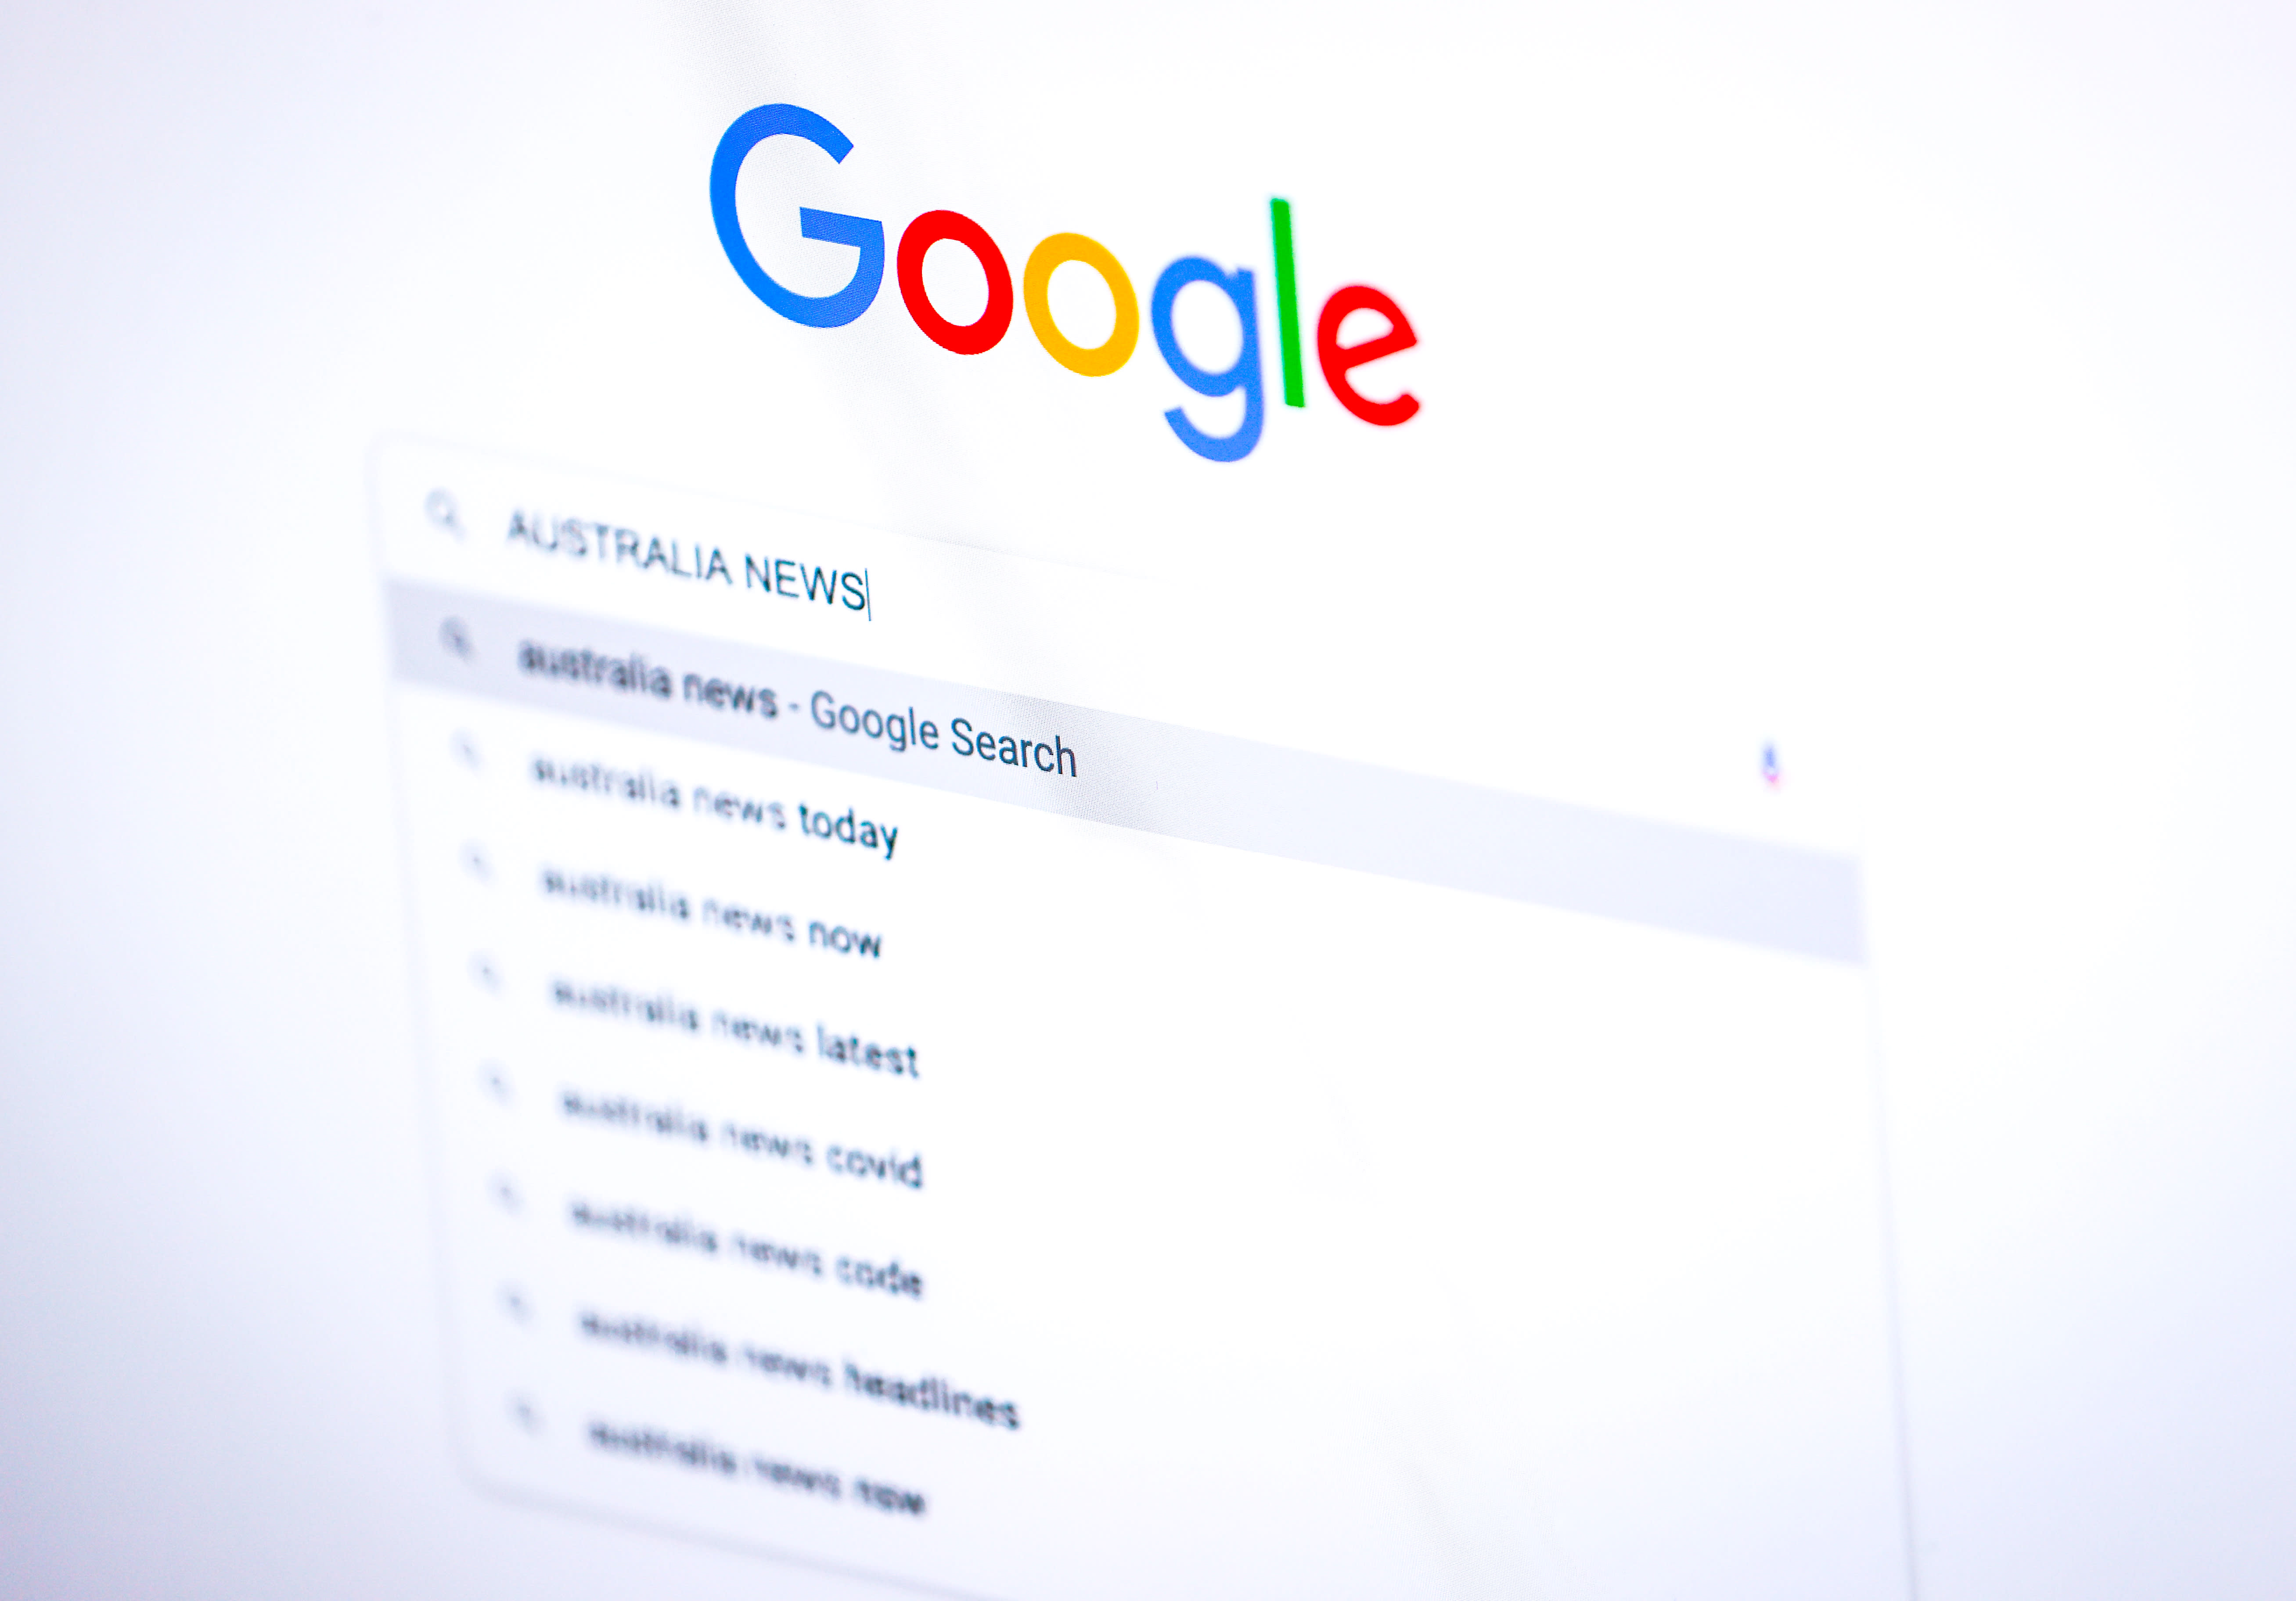 Australia passes news media law requiring Google and Facebook to pay